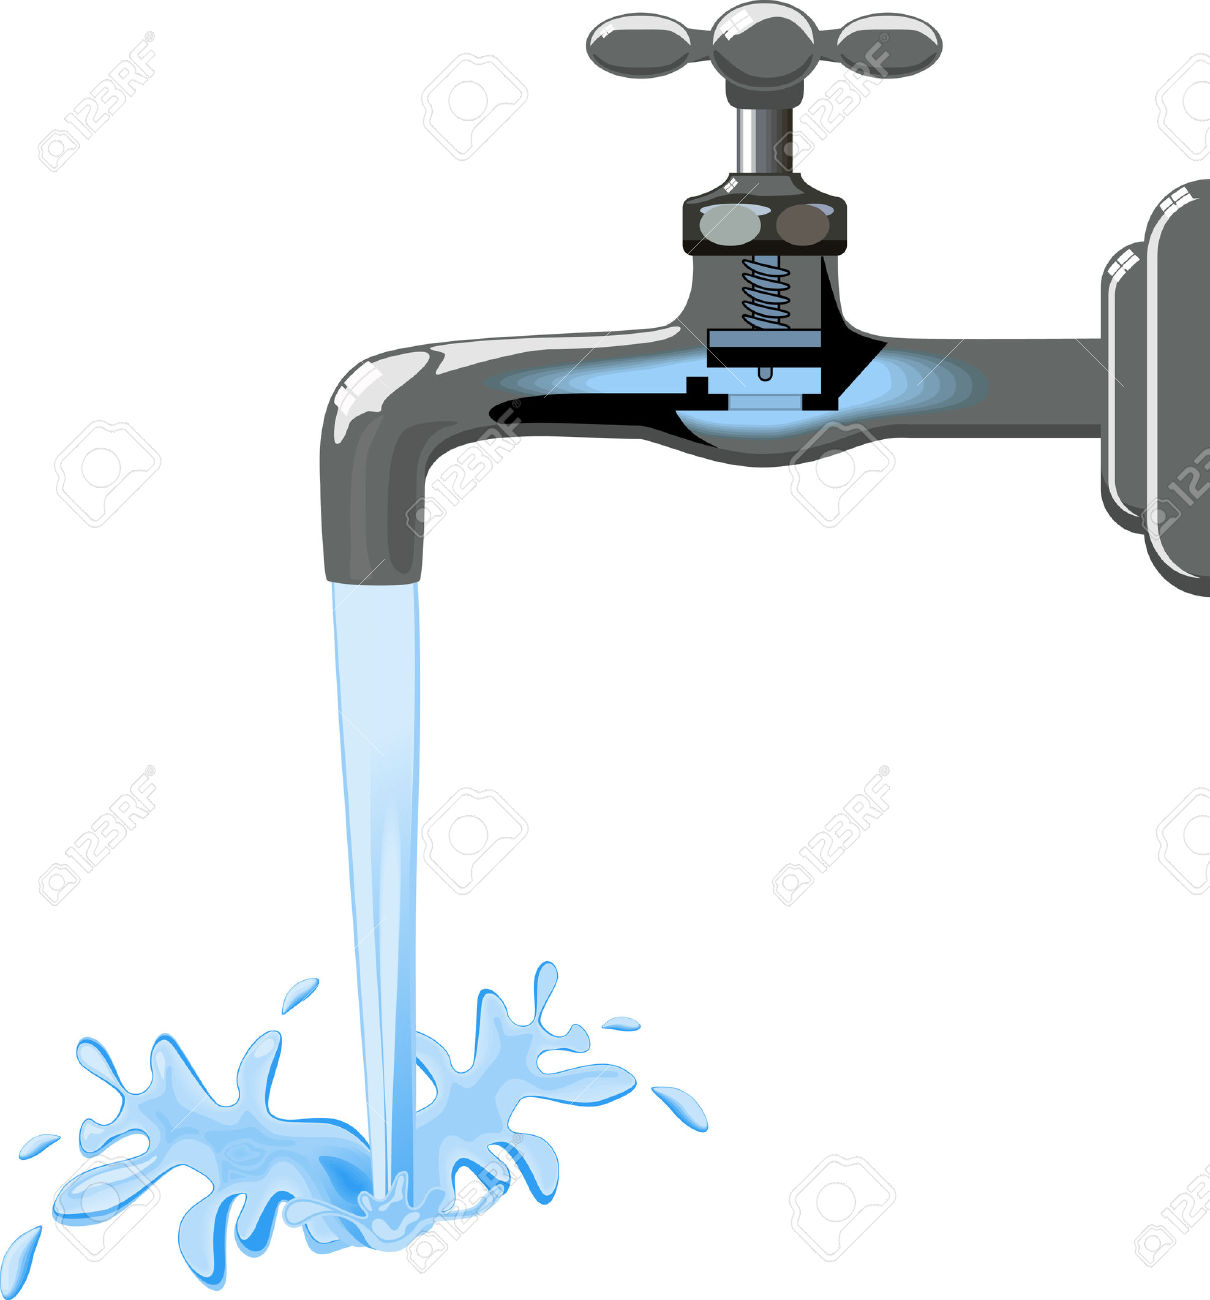 Tap Dripping Water Clip Art.